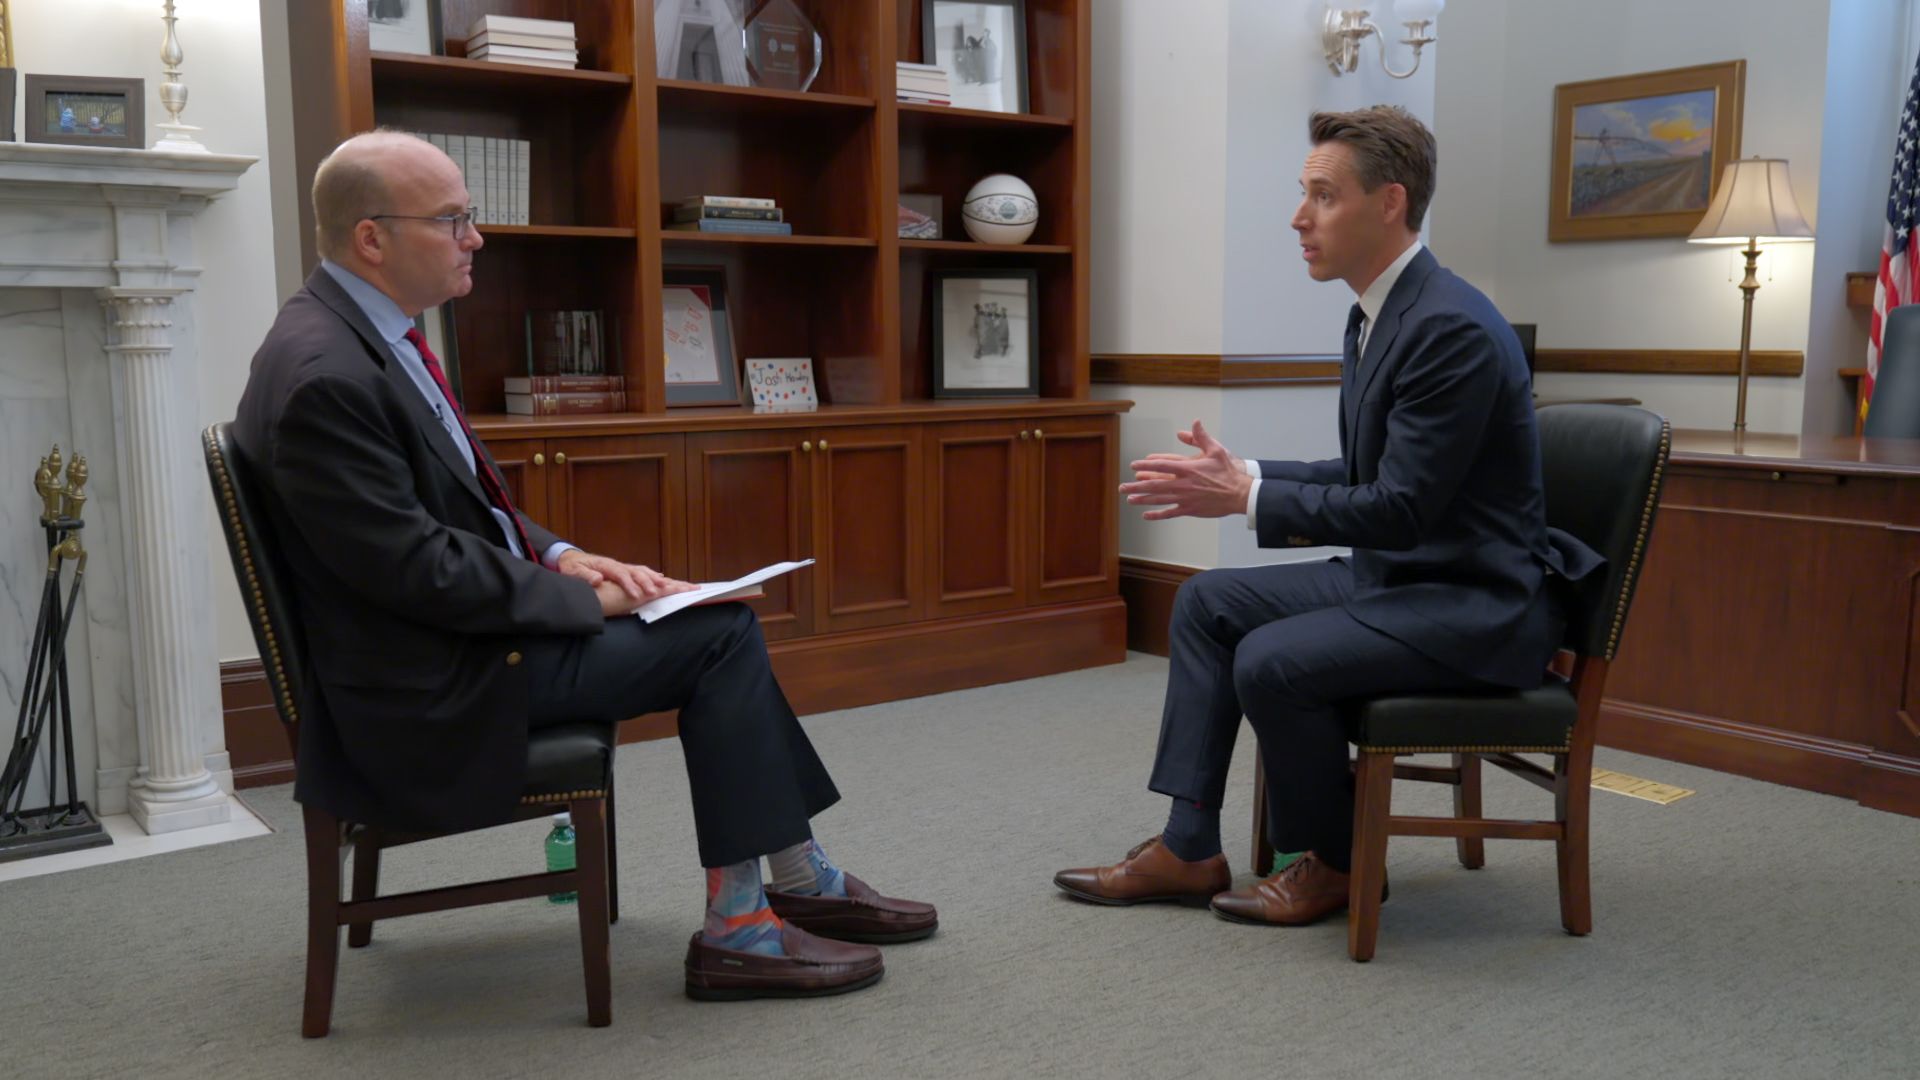 Sen. Josh Hawley is seen speaking with Mike Allen during an interview for 